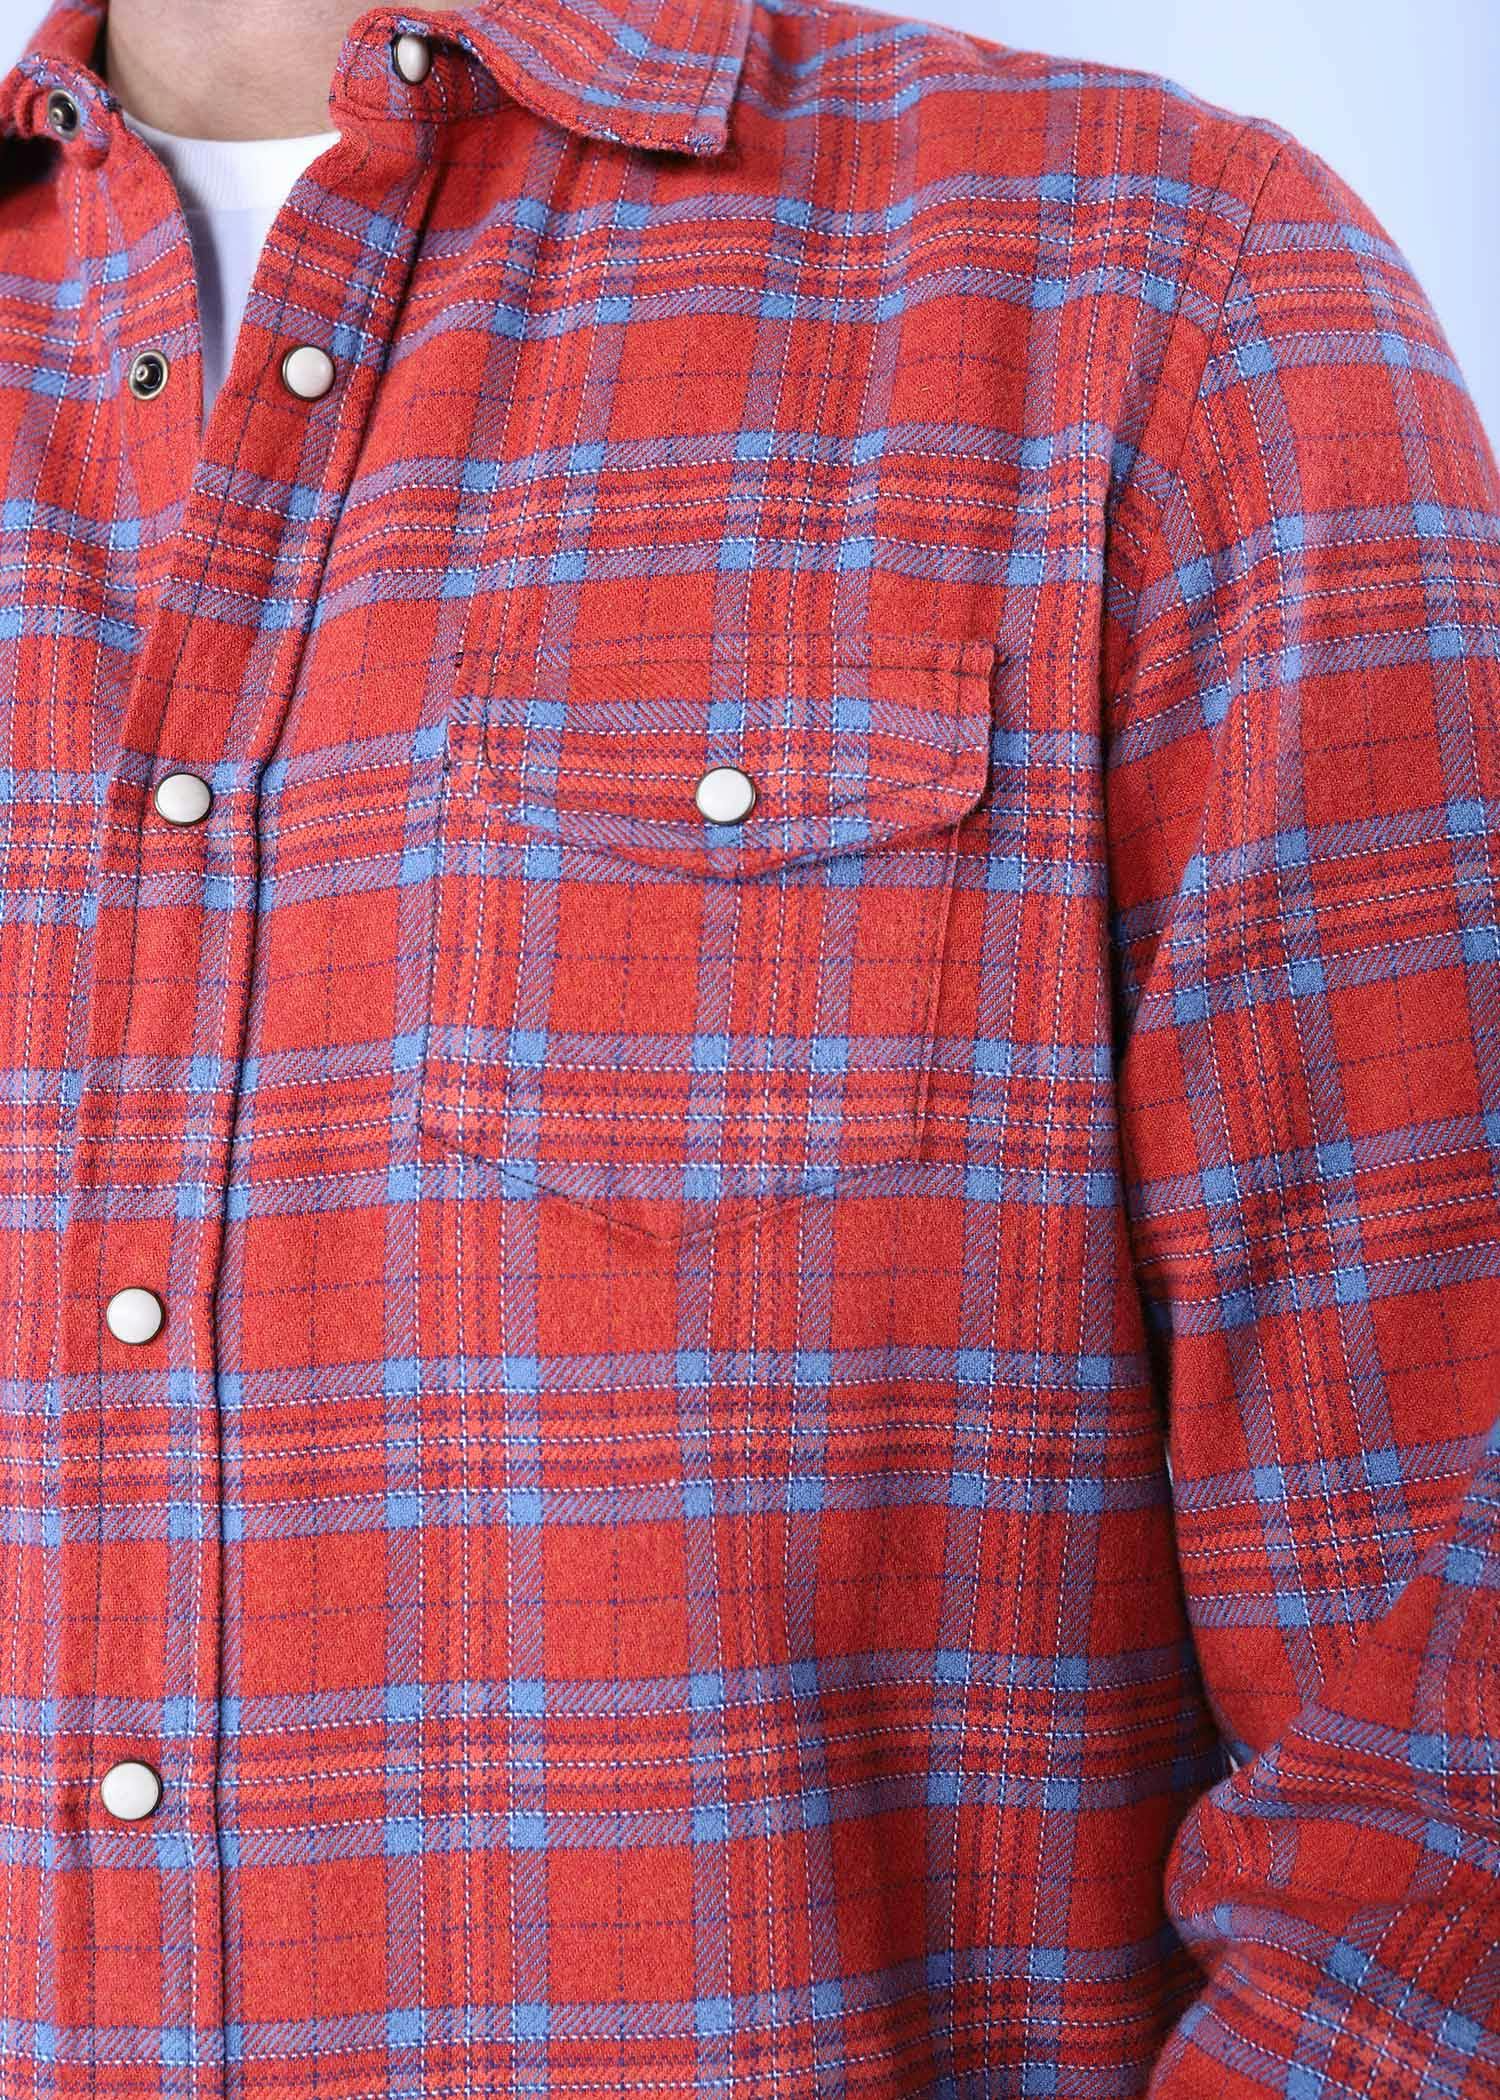 owl flannel shirt red blue color close front view